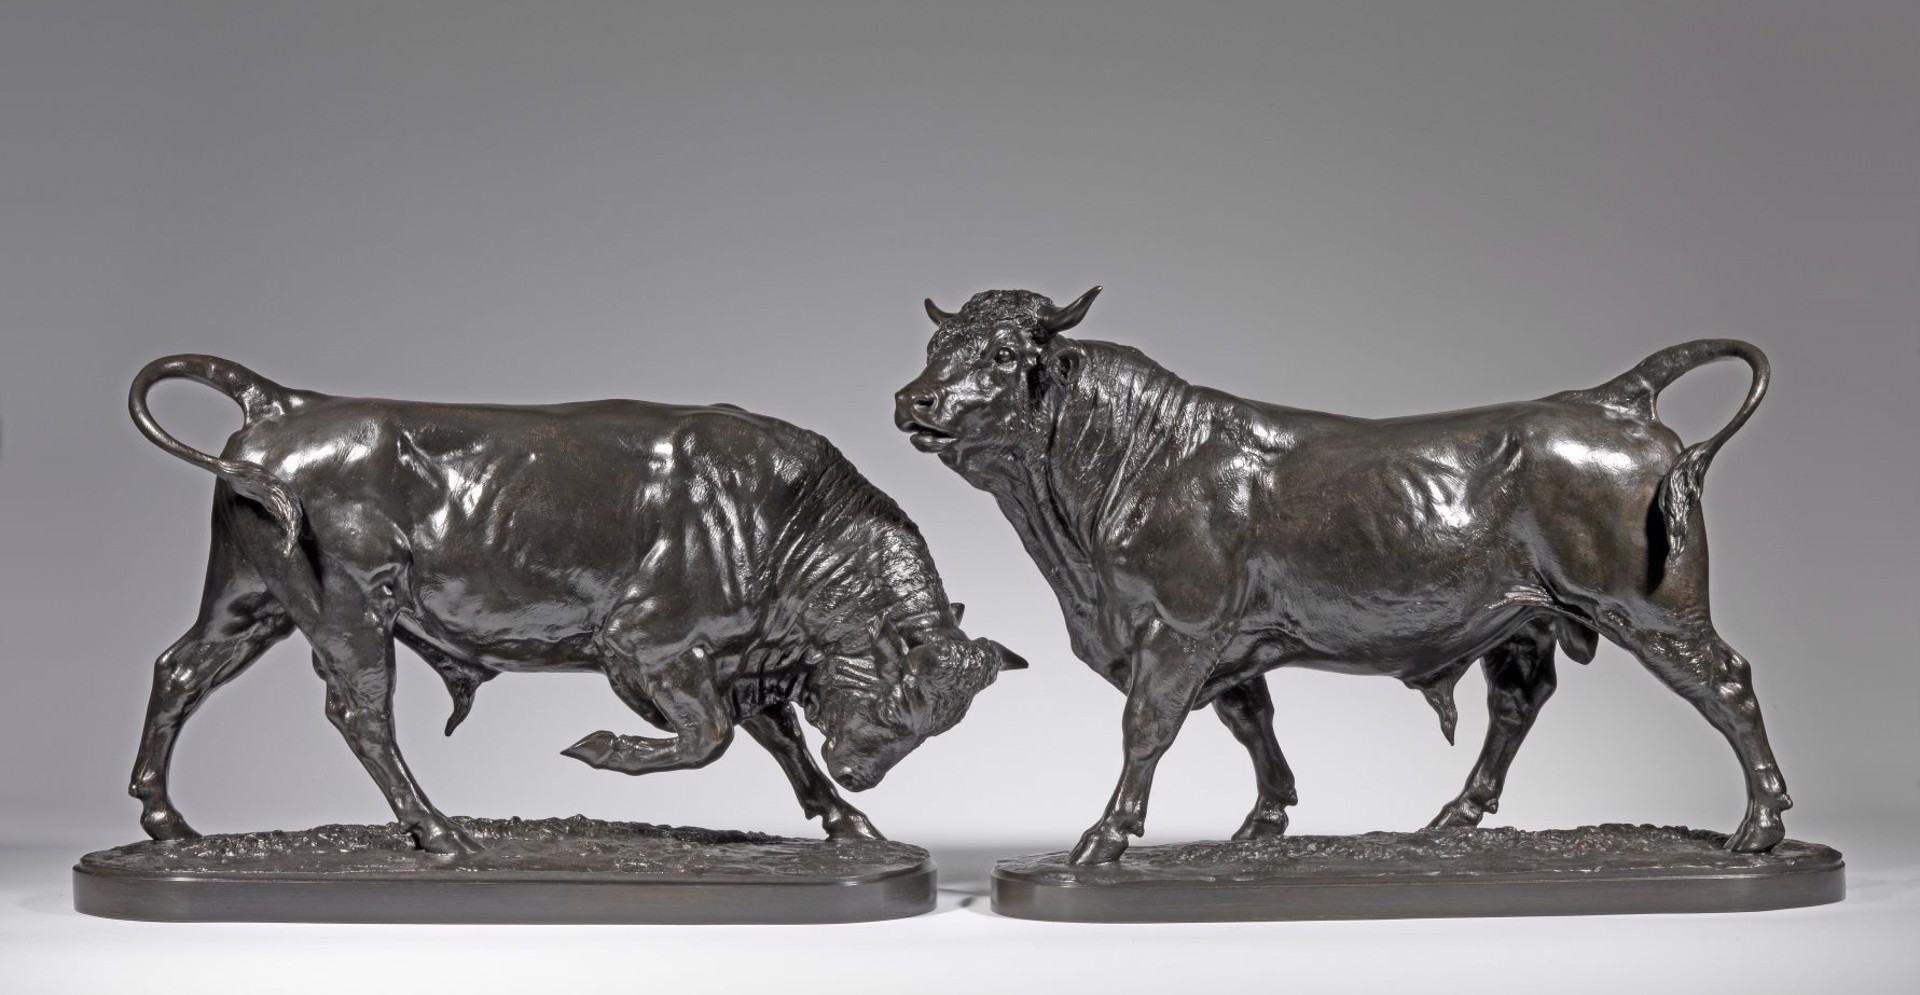 Charging Bull "Taureau Chargeant" and Standing Bull "Taureau Debout" by Isidore Jules Bonheur